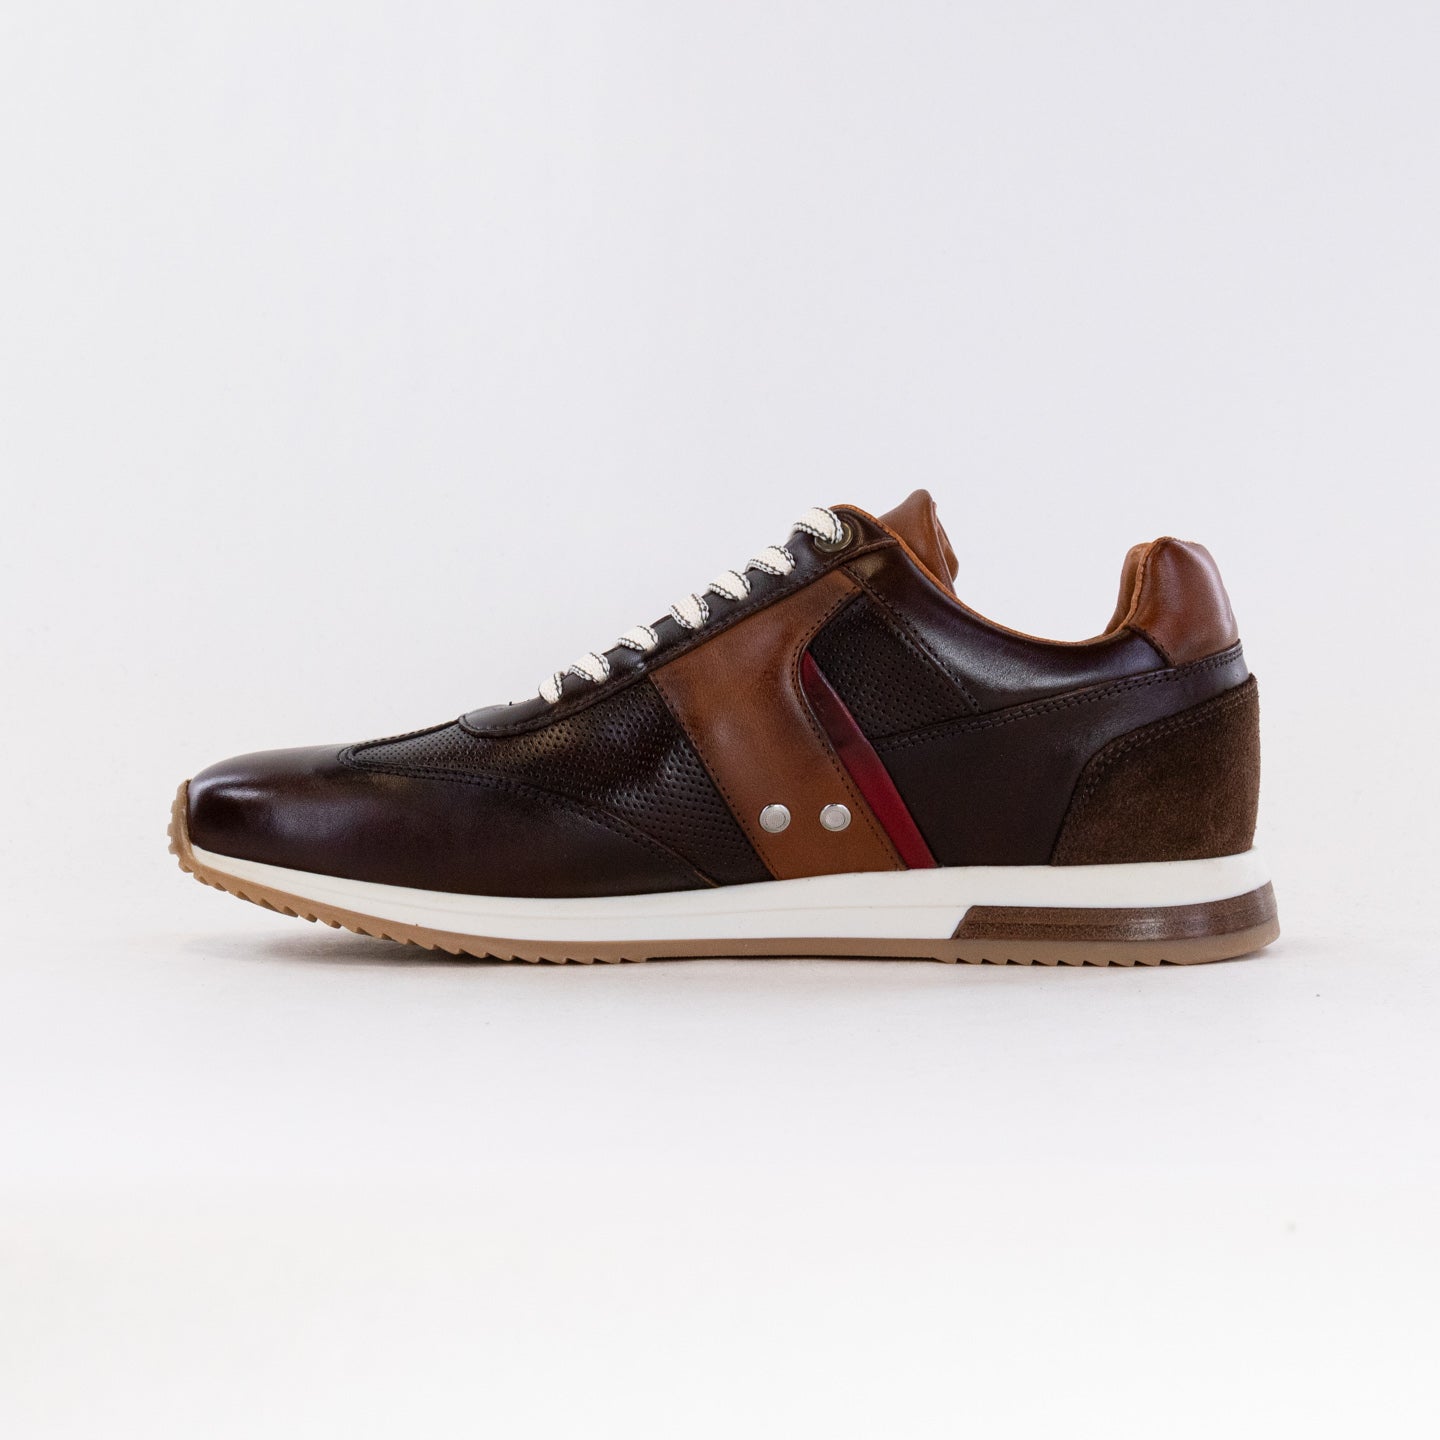 Ambitious Slow Classic Sneaker (Men's) - TD Moro - Dark Brown Leather